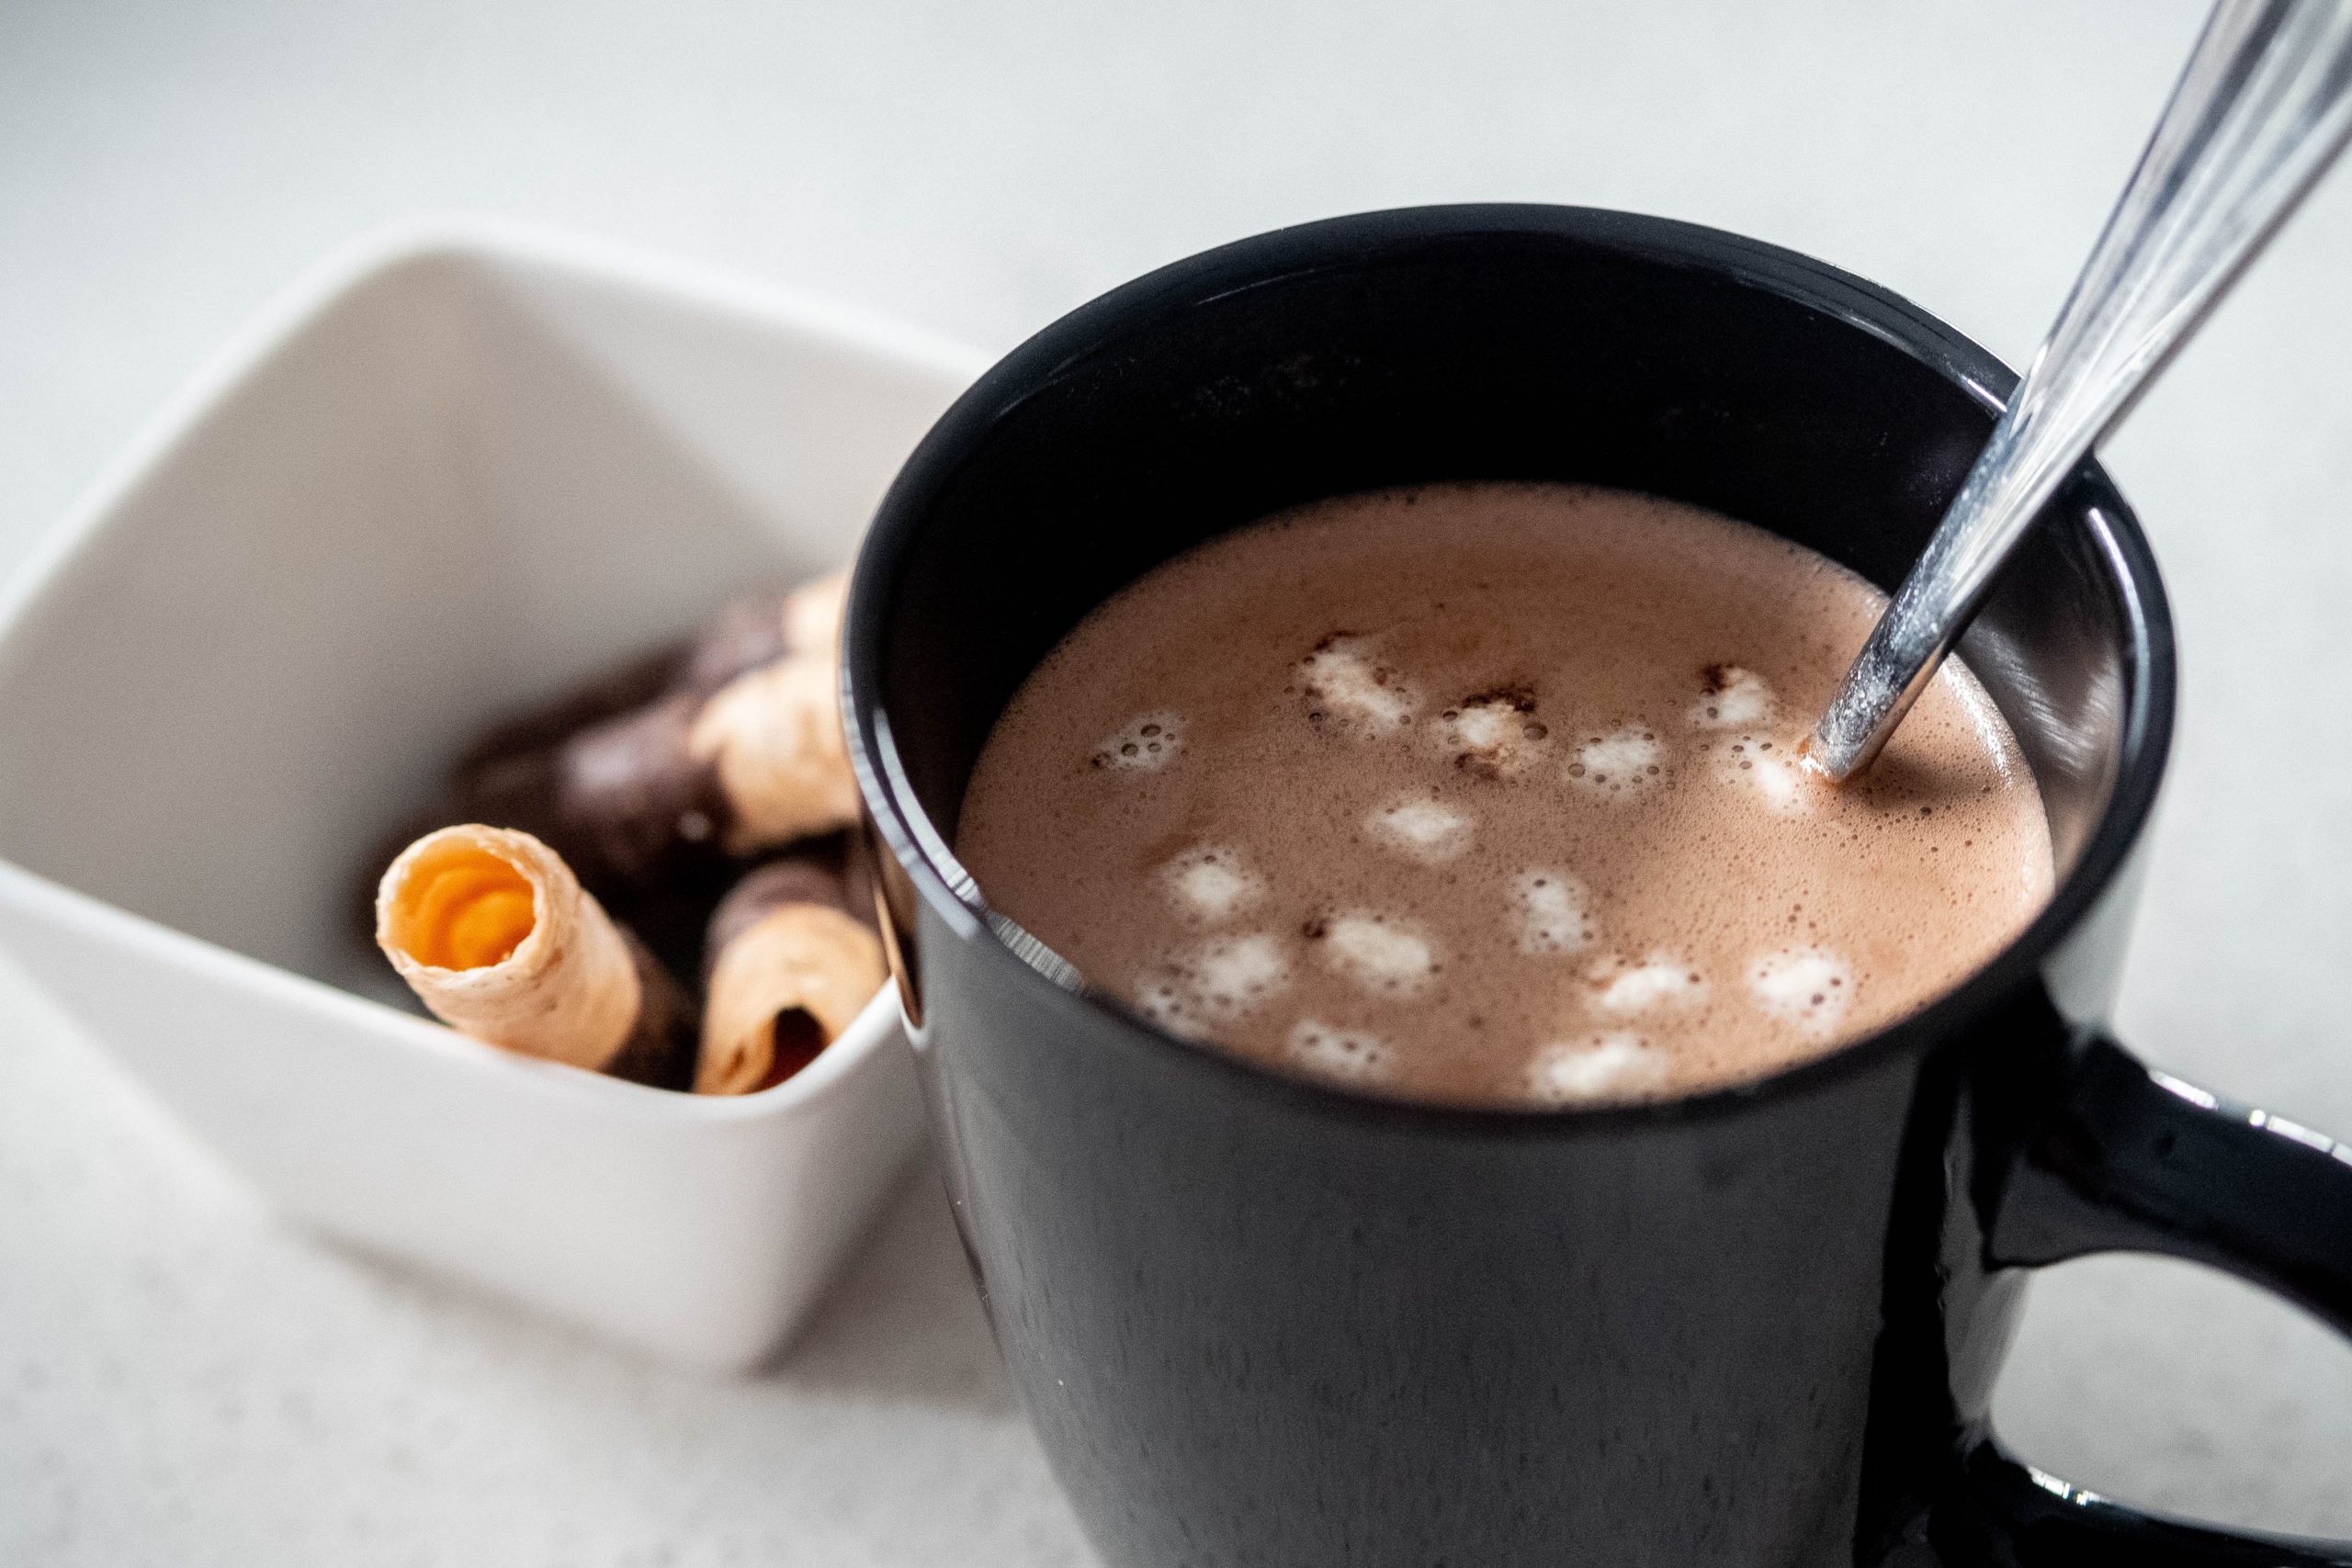 How to Warm Up Milk for Hot Chocolate